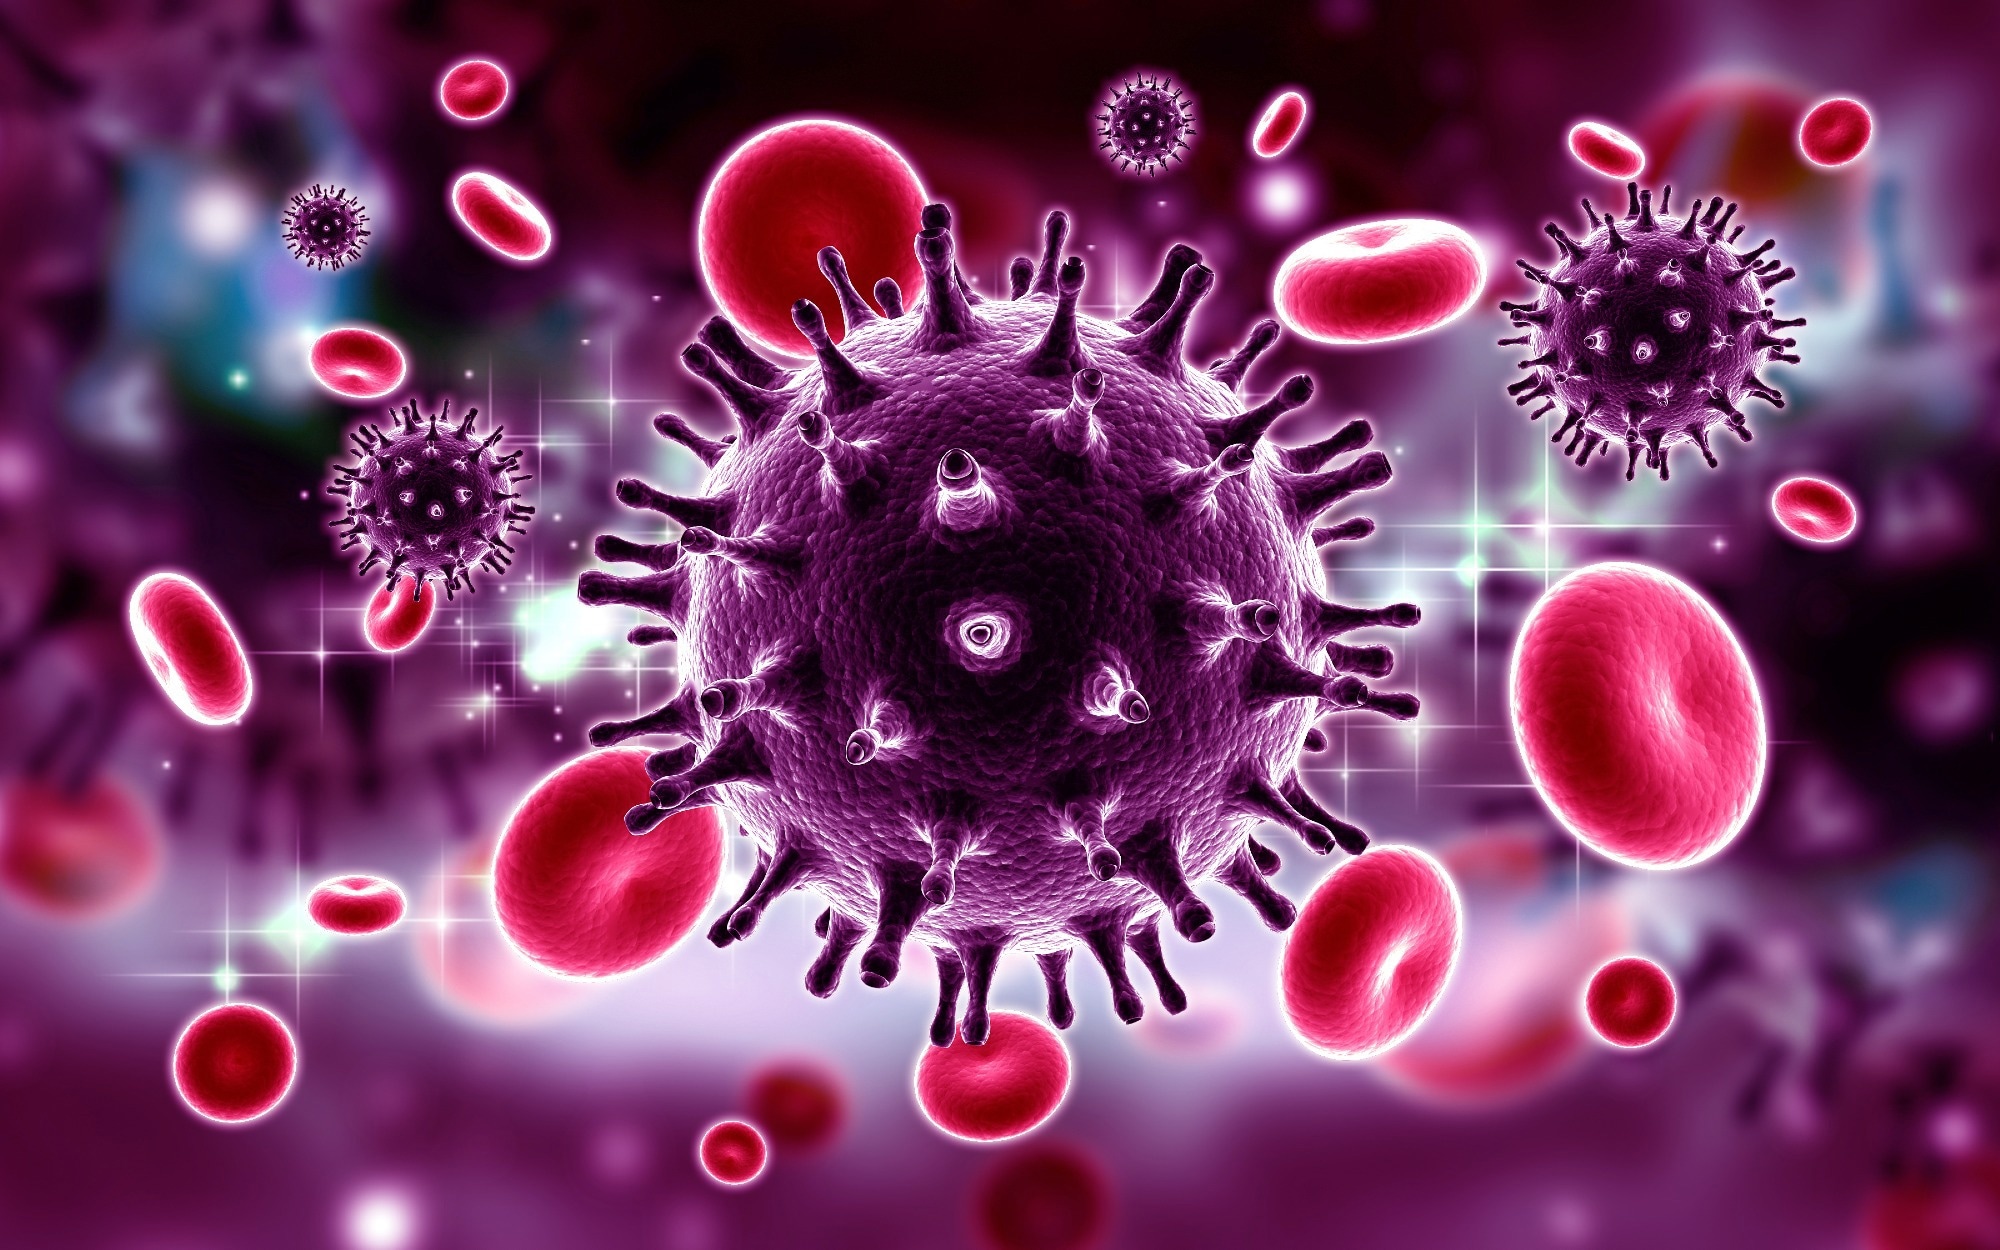 Study: Association of ABO and RhD blood groups with the risk of HIV infection. Image Credit: RAJCREATIONZS/Shutterstock.com